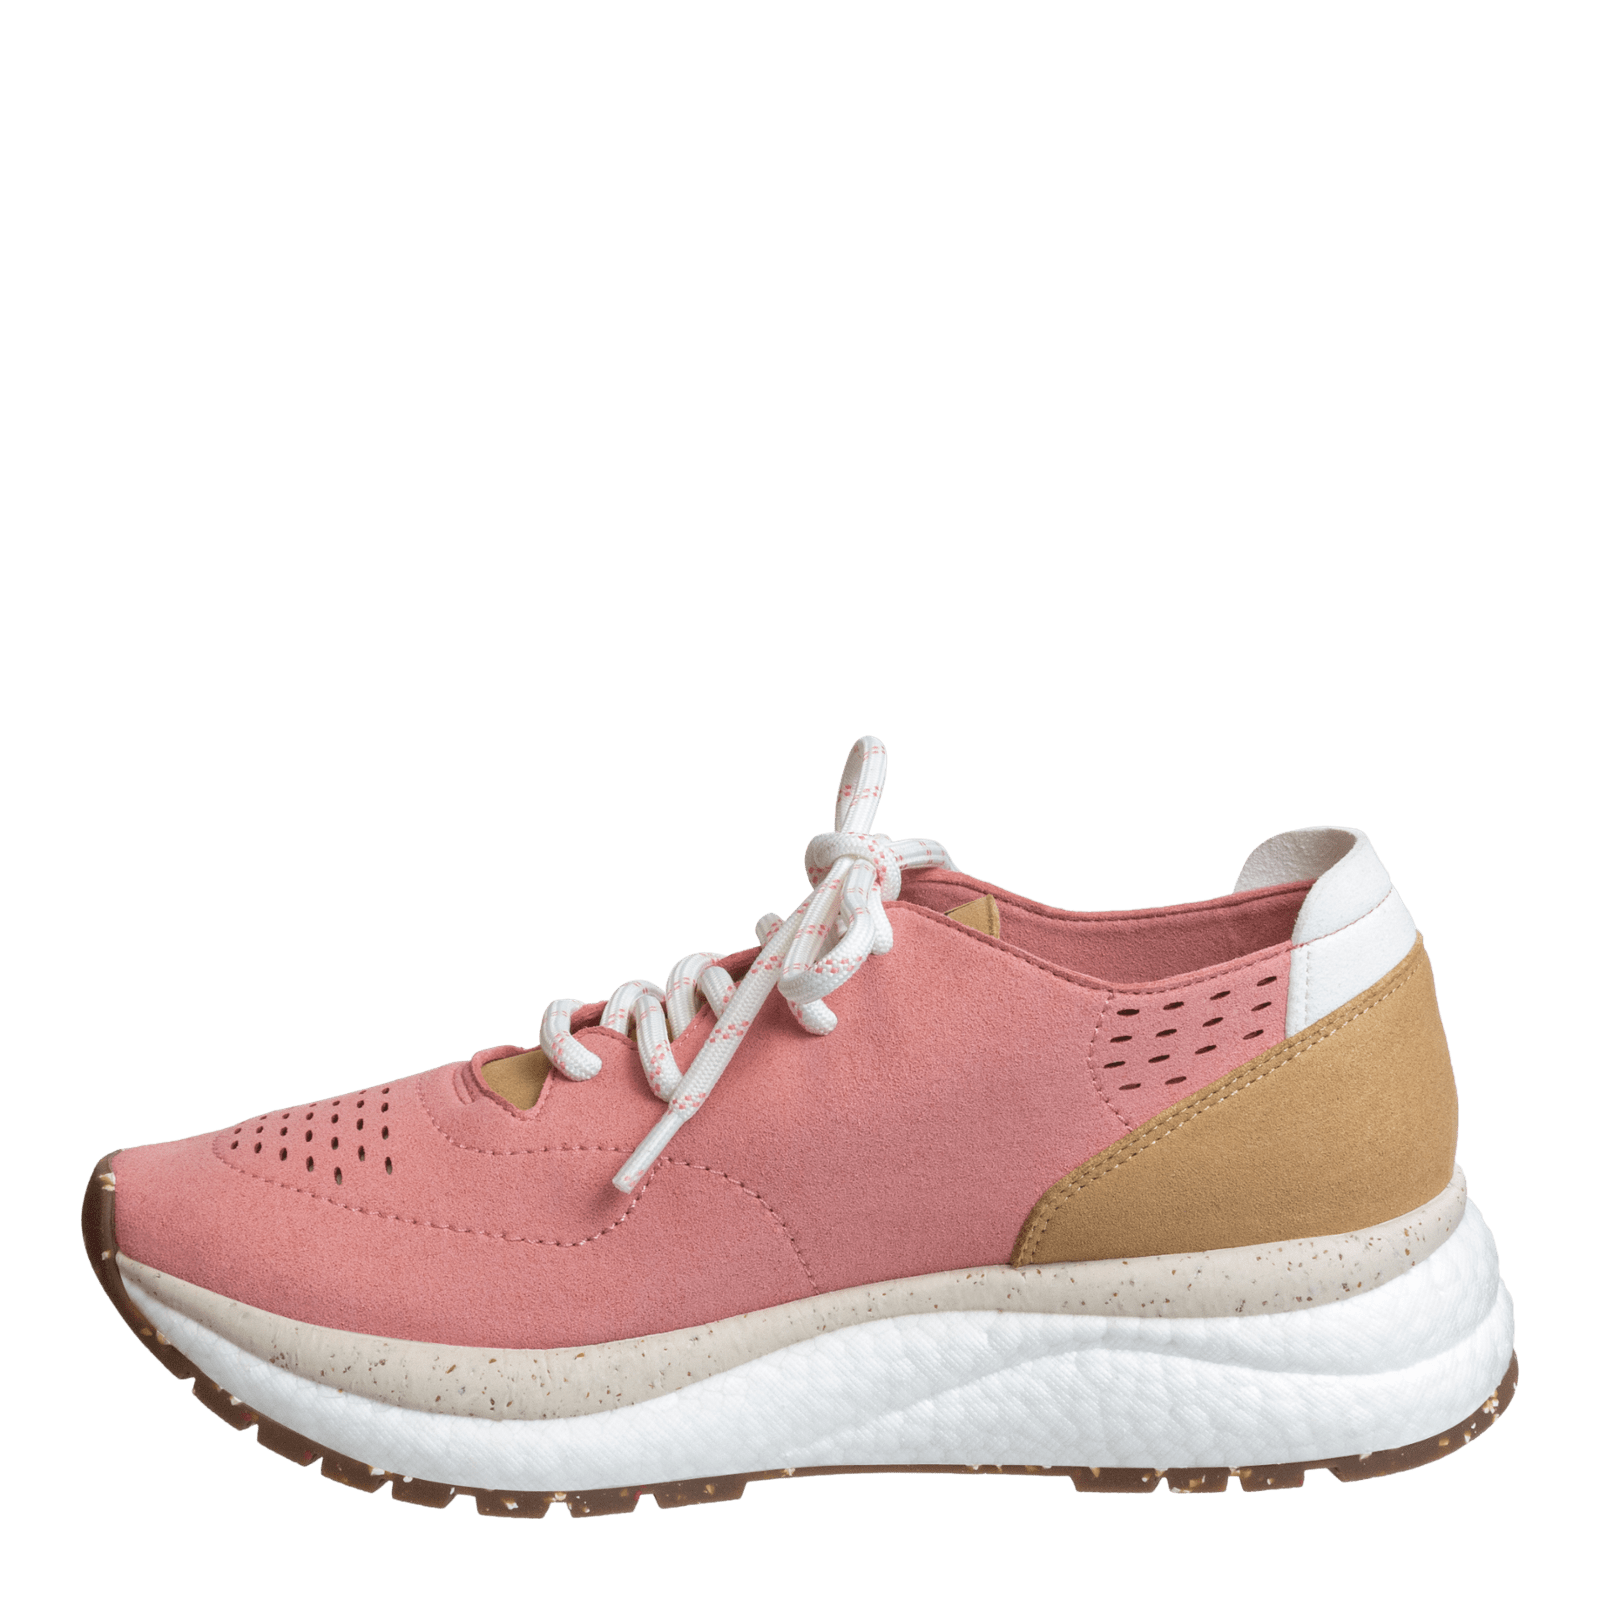 FREE in SUNSET Sneakers